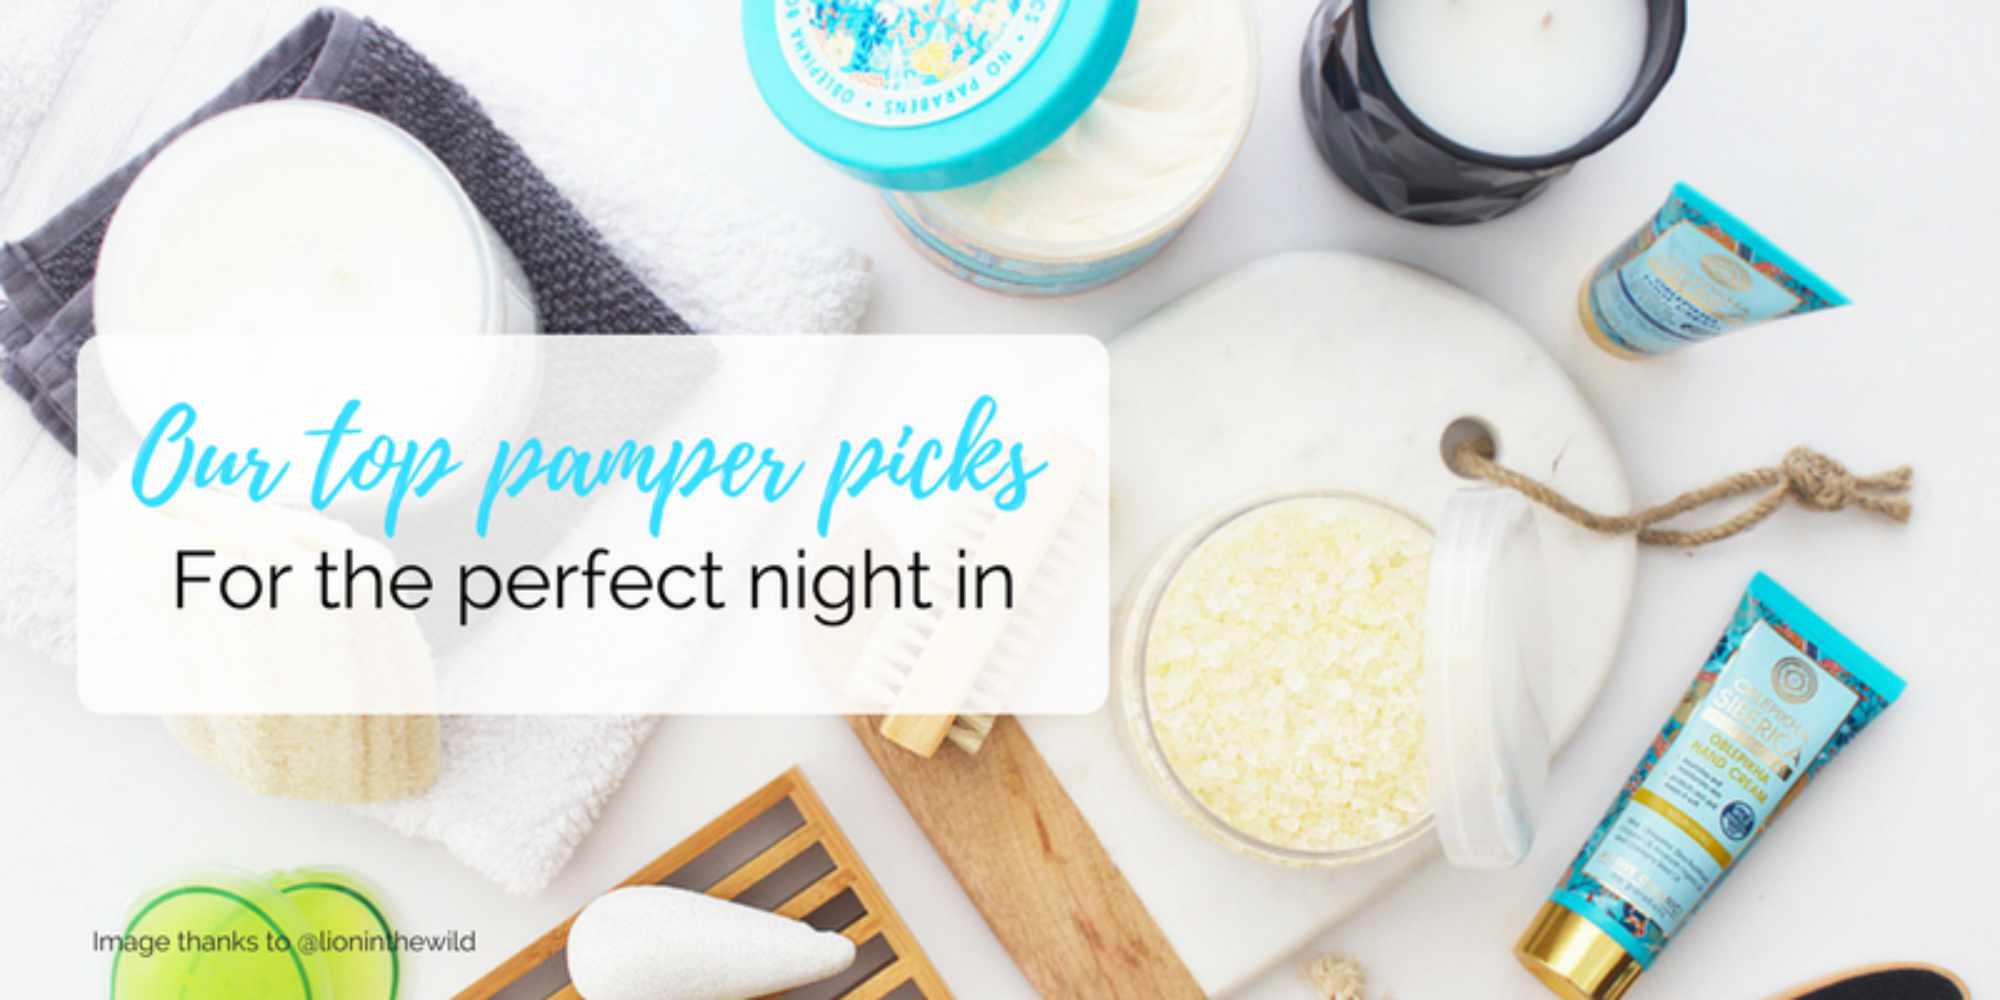 Our Top Pamper Picks for the Perfect Night In